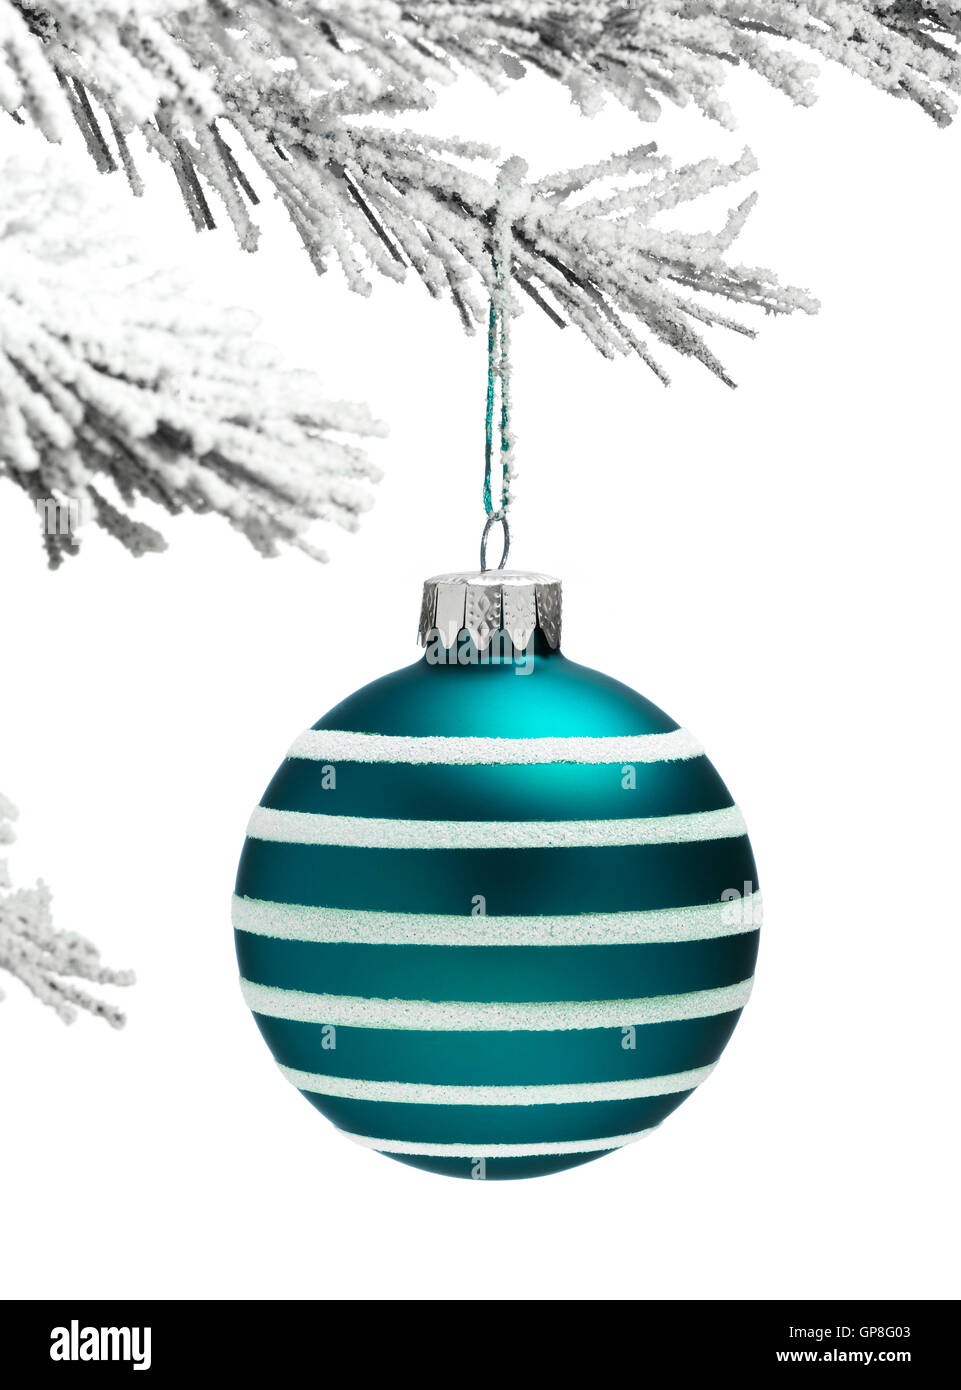 Snow covered Christmas tree with a blue Bauble hanging on a white background Stock Photo